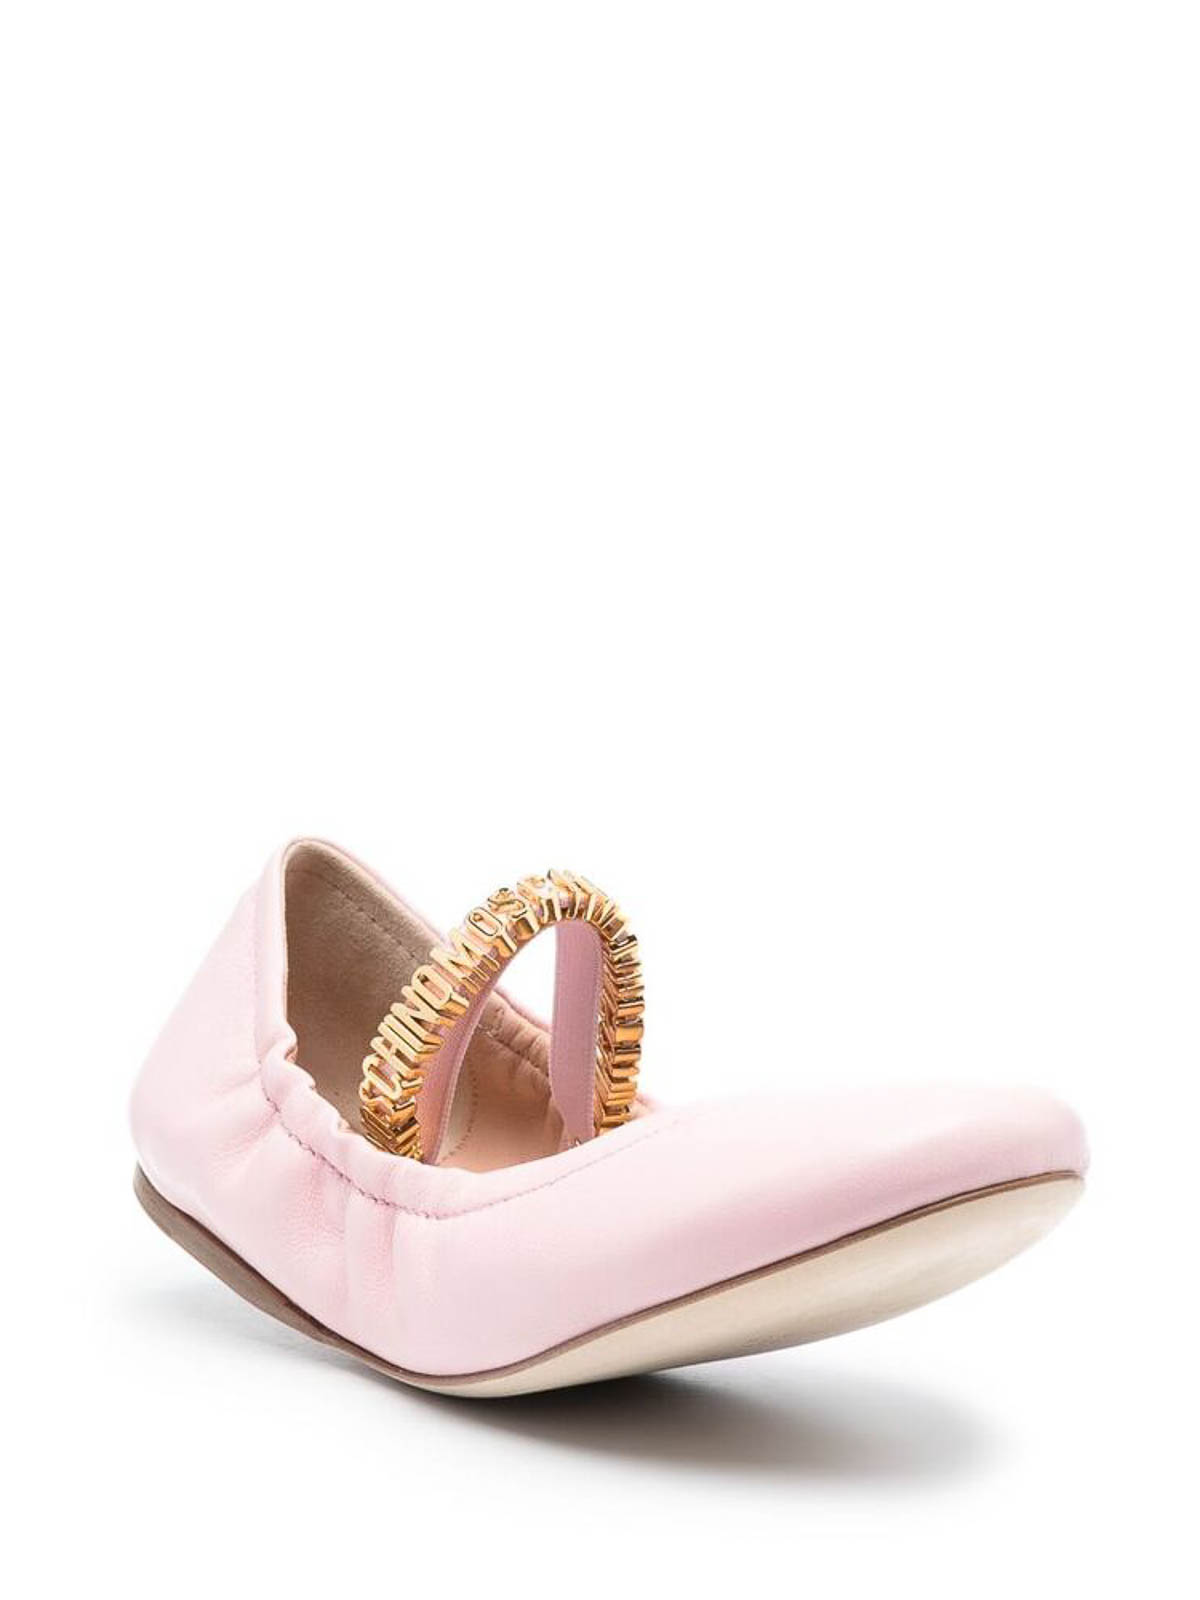 Shop Moschino Leather Ballerina Shoes Li In Nude & Neutrals